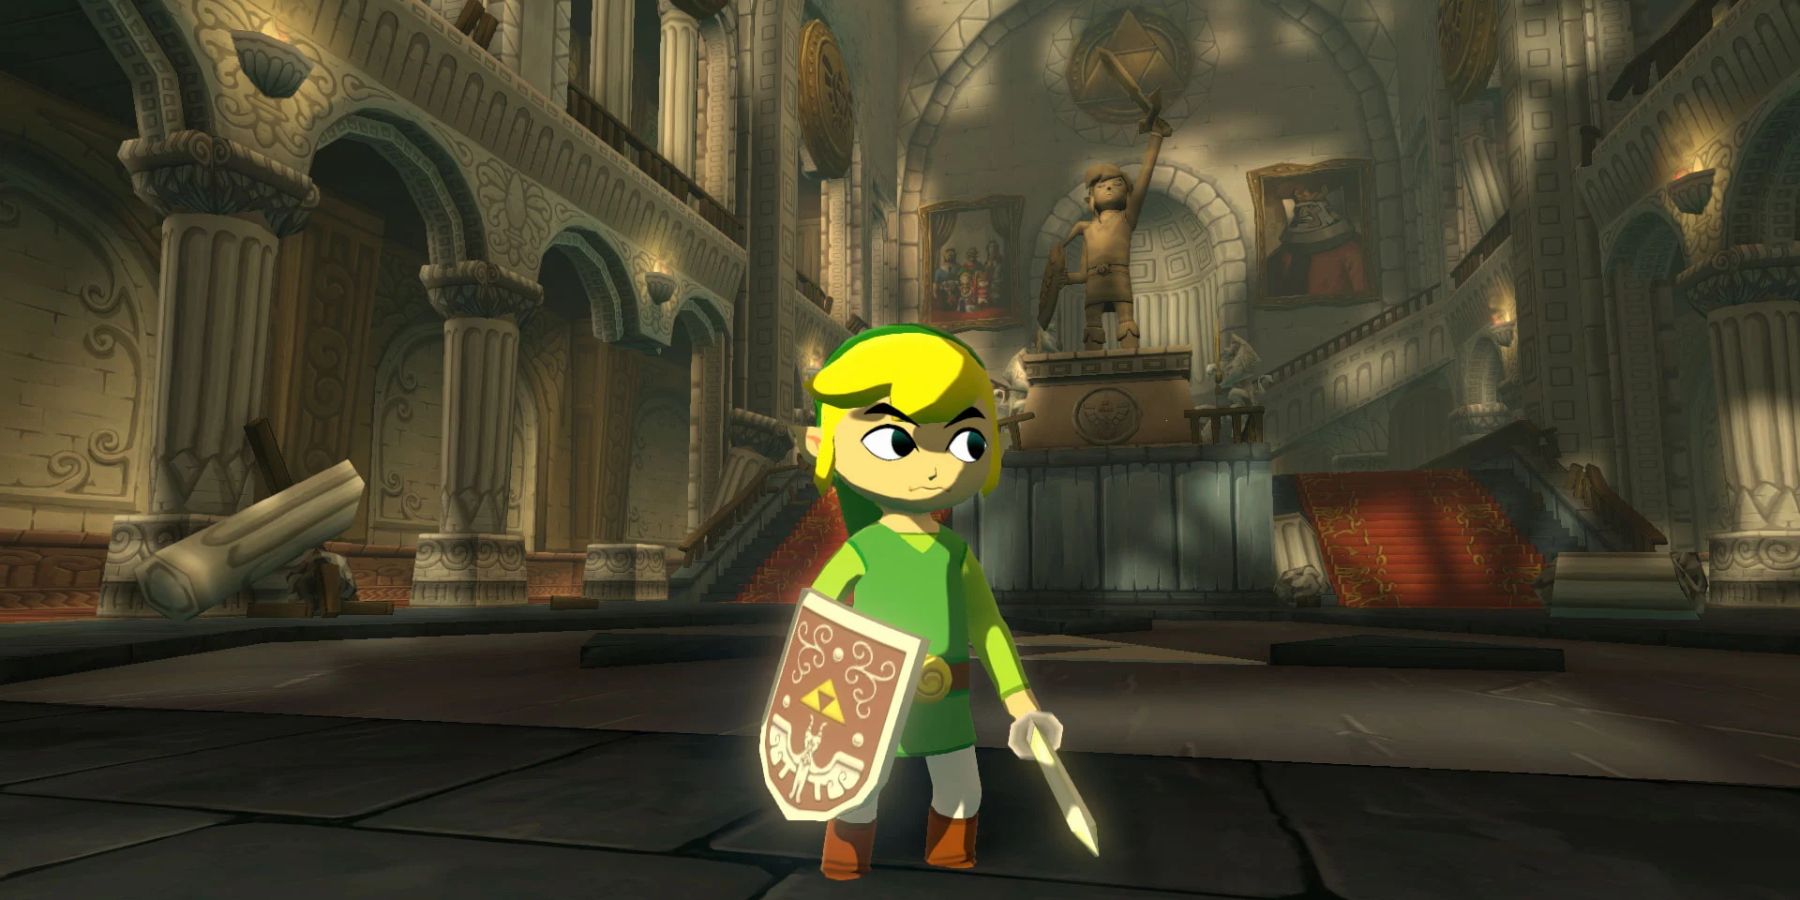 Link standing in the main hall of Wind Waker's Hyrule Castle, with broken pillars and a statue of the Hero of Time in the background.